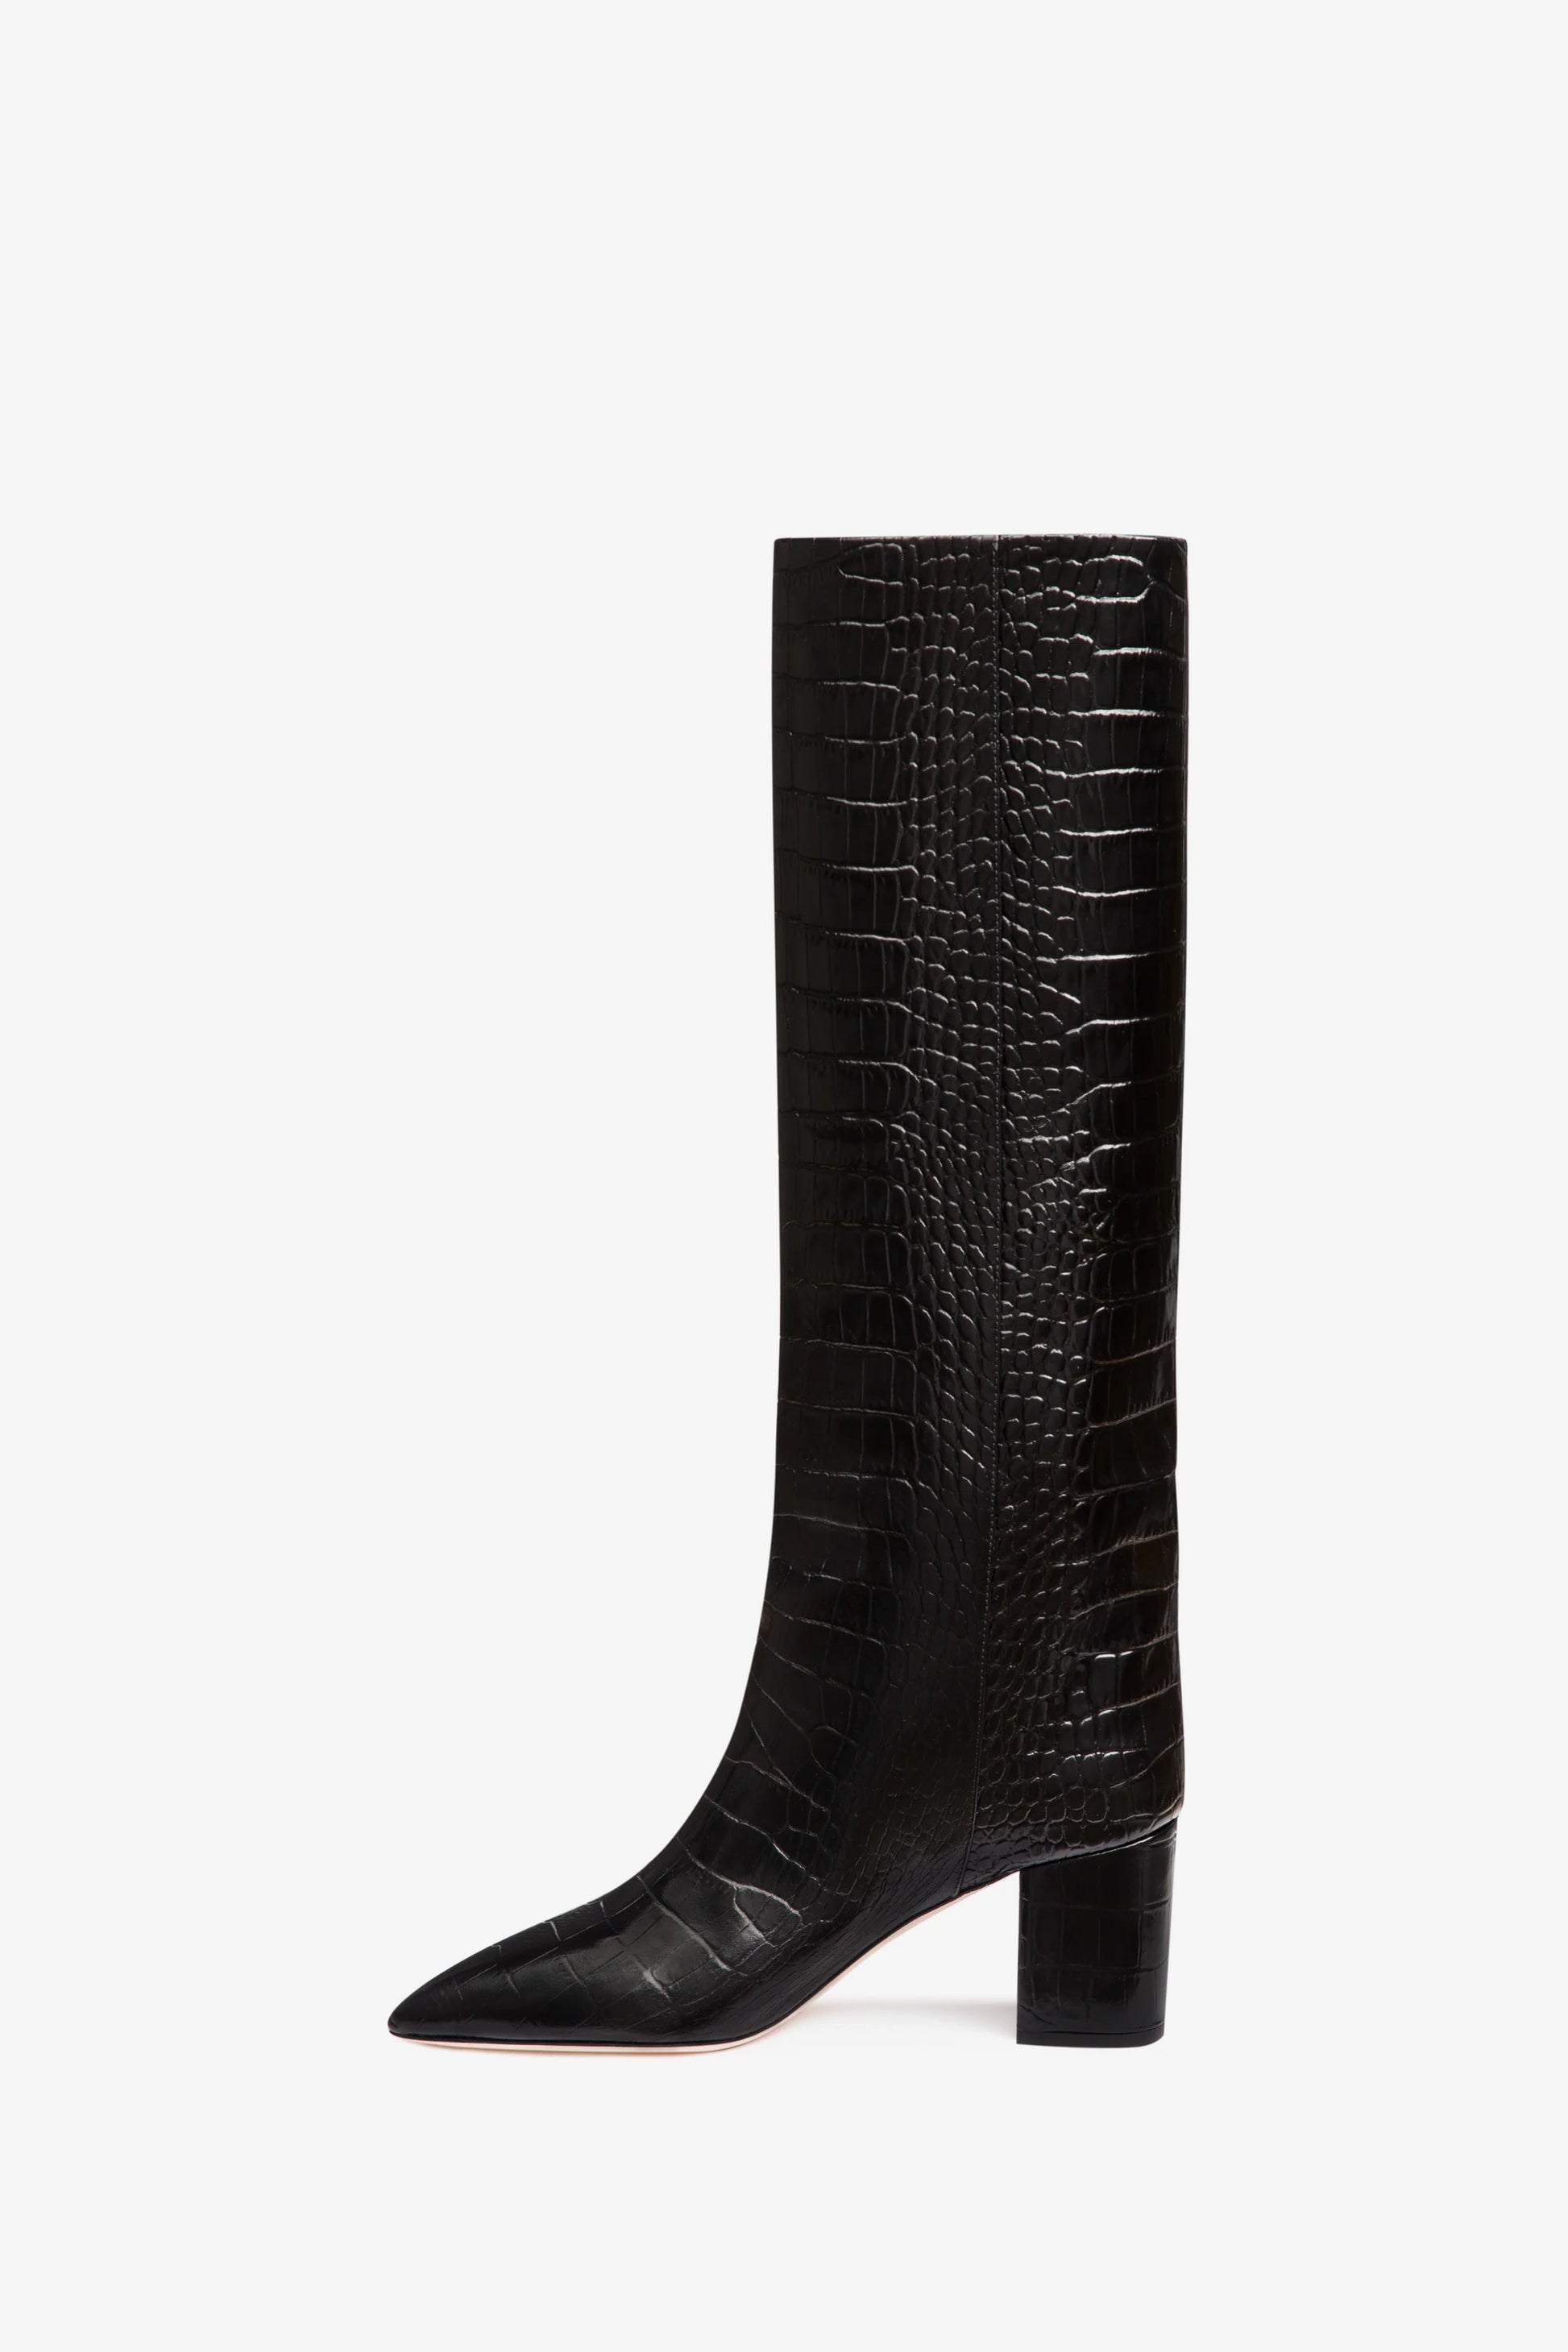 Carbon embossed leather boot - Side